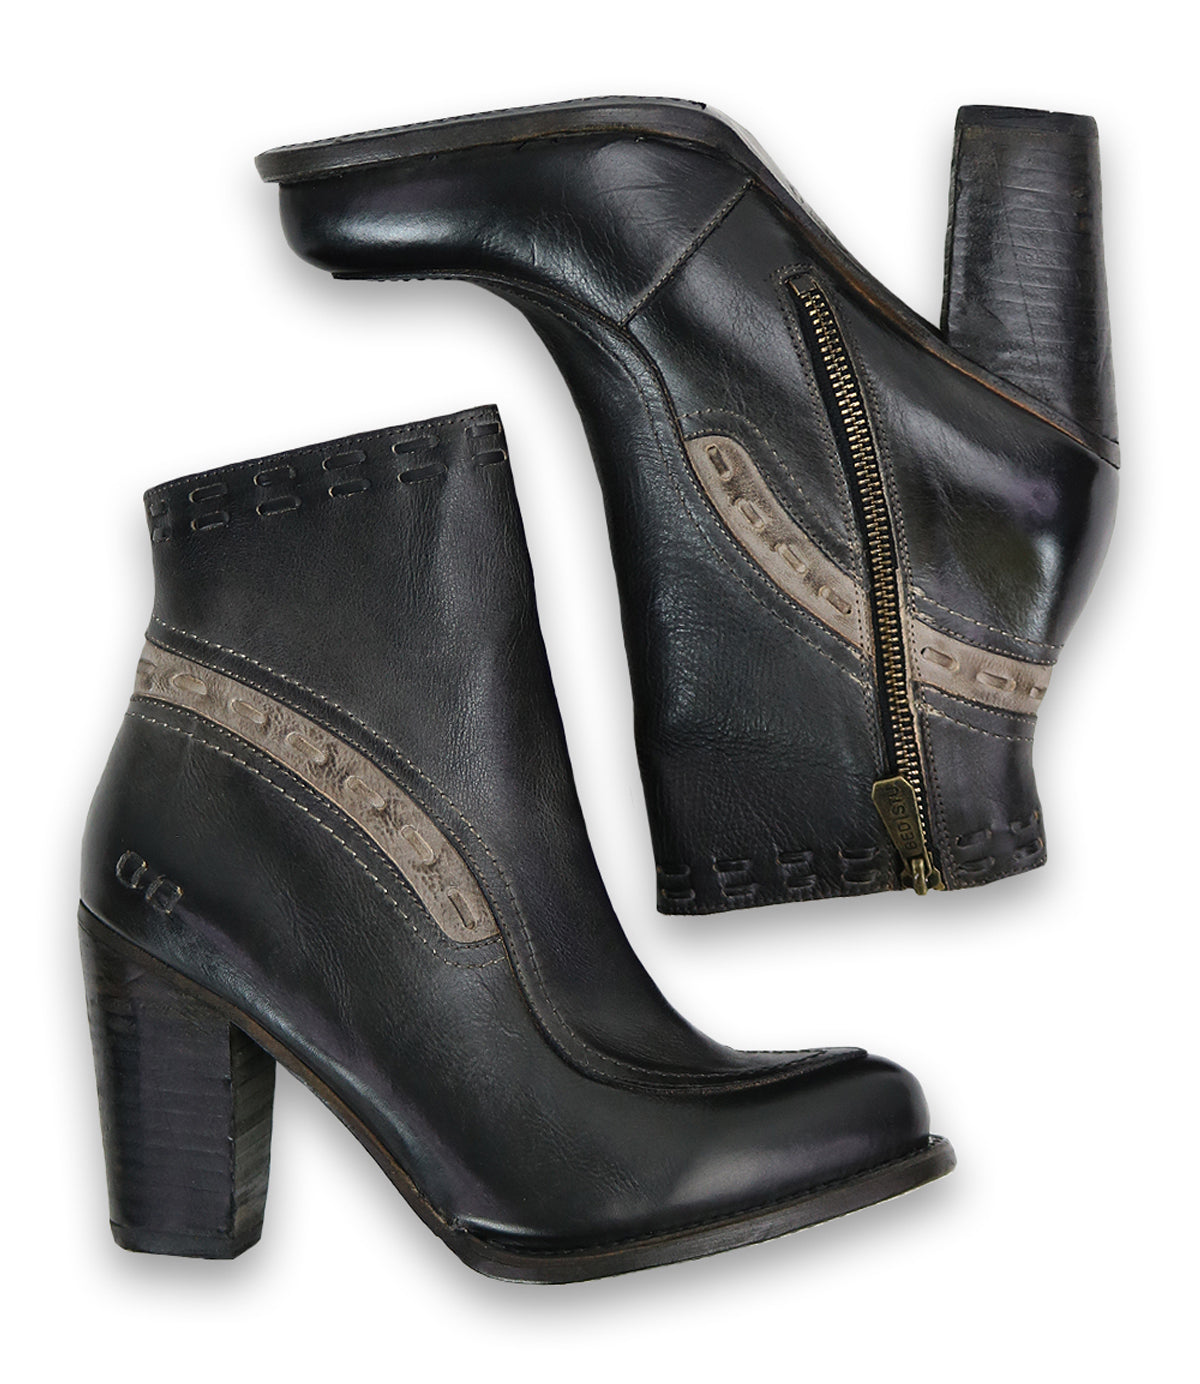 A pair of Bed Stu Yuno leather ankle boots with a zipper on the side.